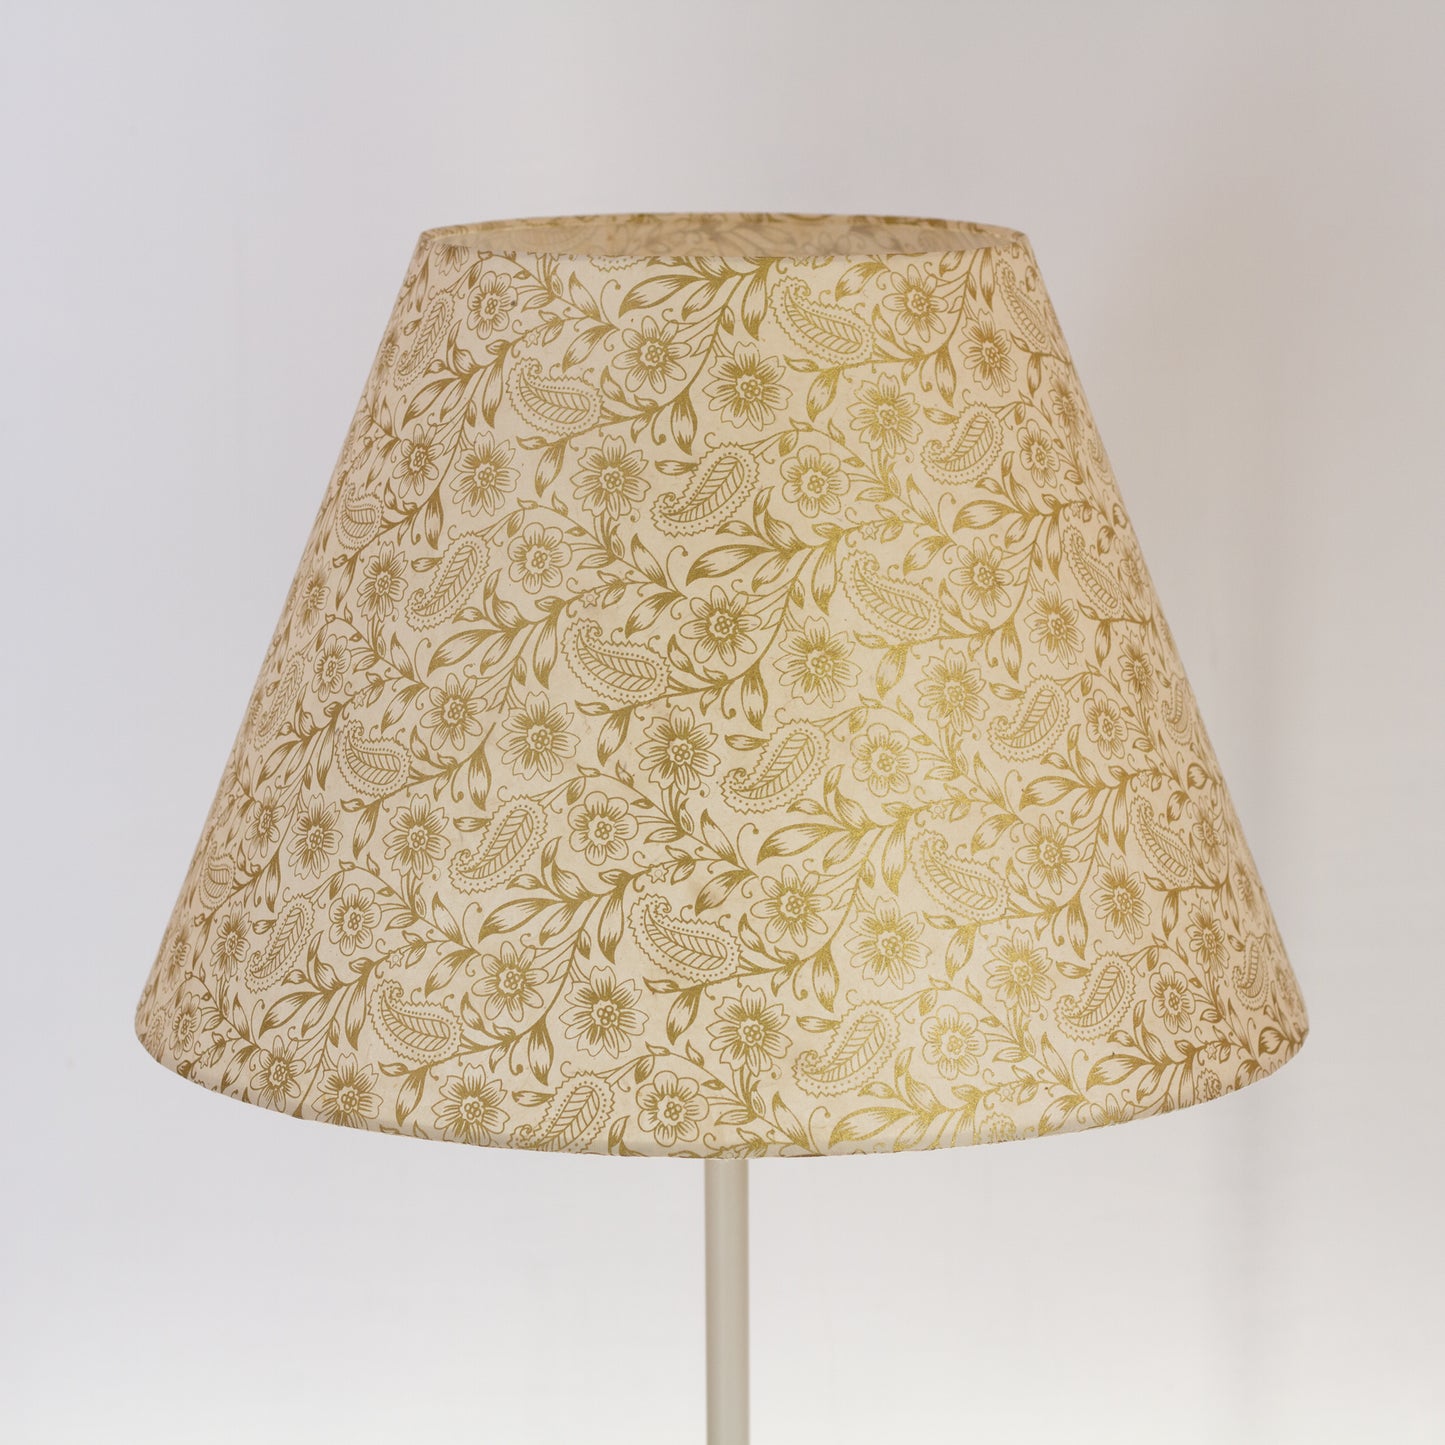 Conical Lamp Shade P69 - Garden Gold on Natural, 25cm(top) x 50cm(bottom) x 33cm(height)